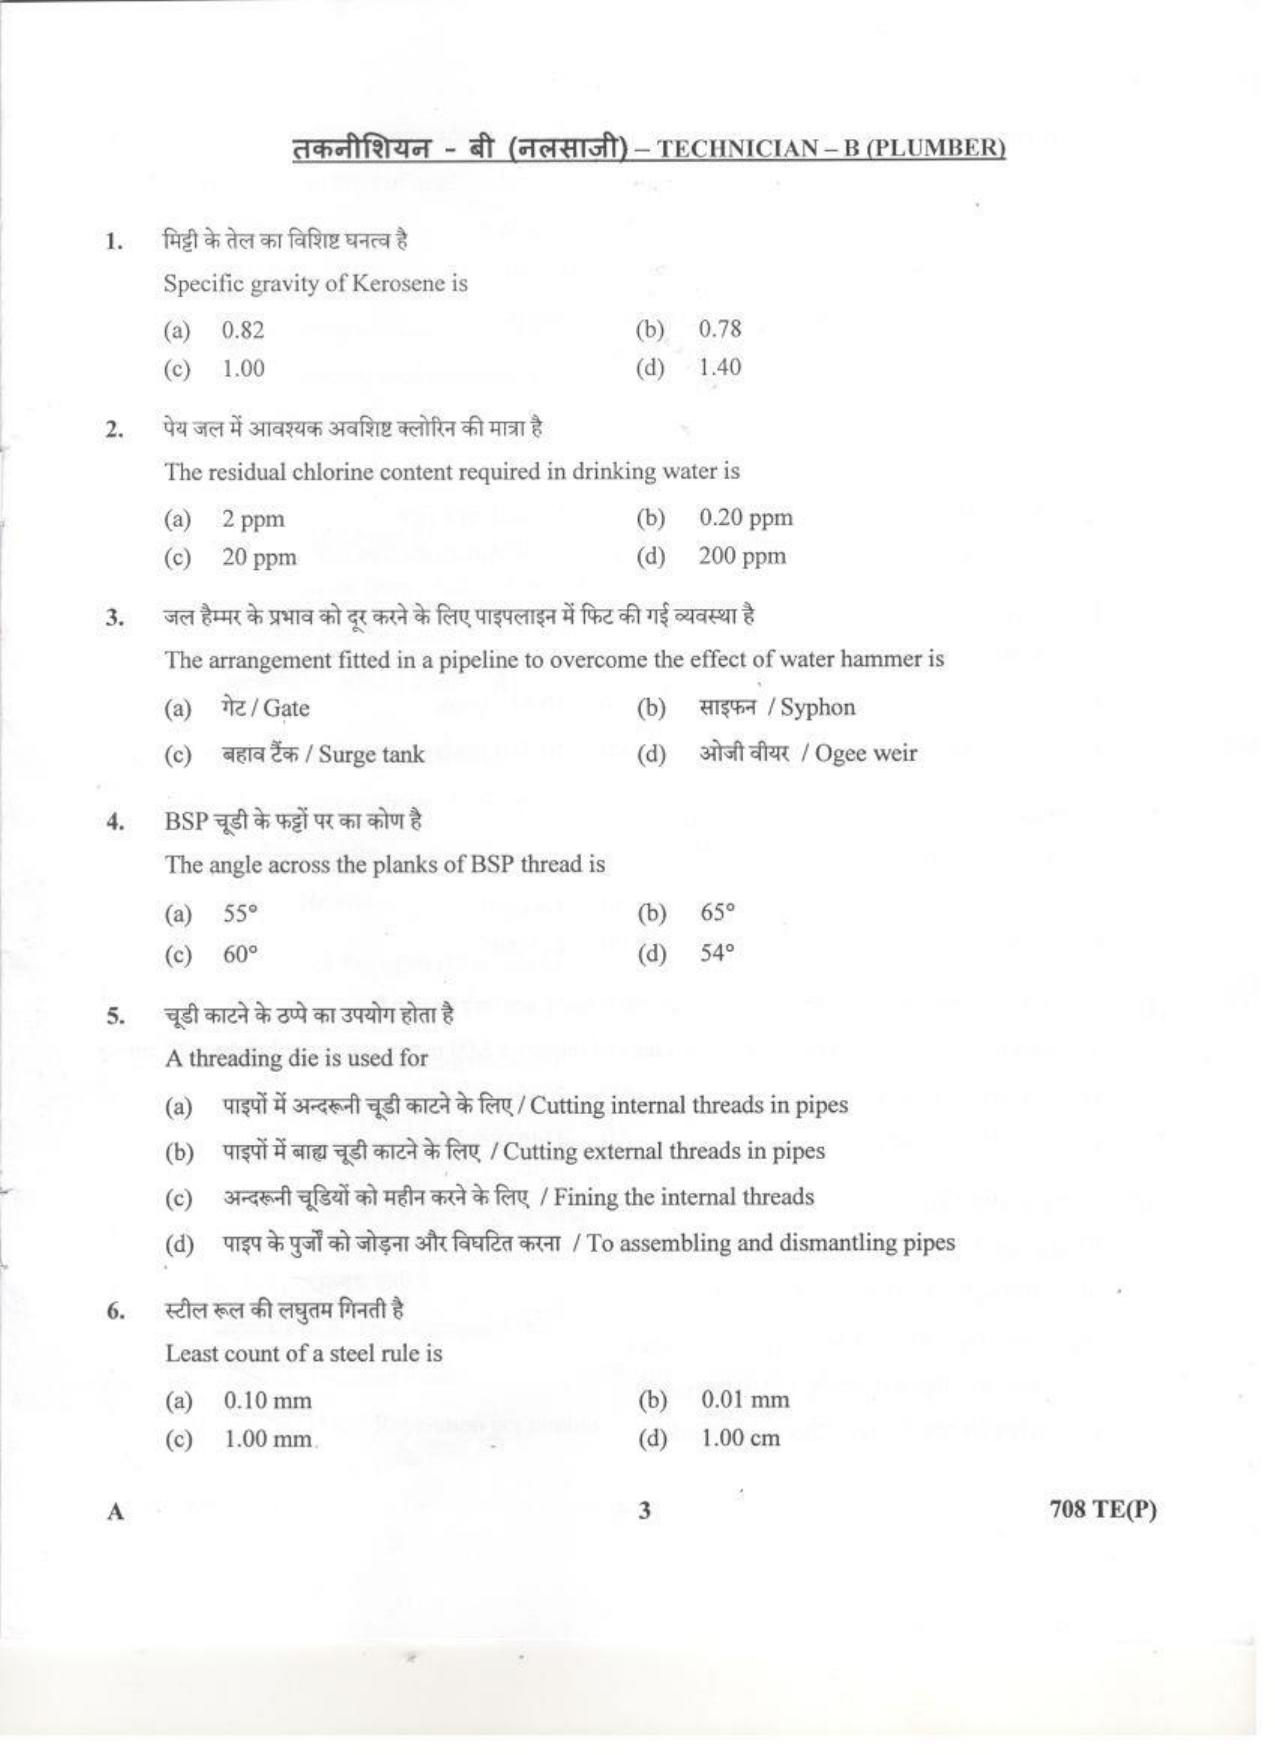 LPSC Technician ‘B’ (Plumber) 2020 Question Paper - Page 2